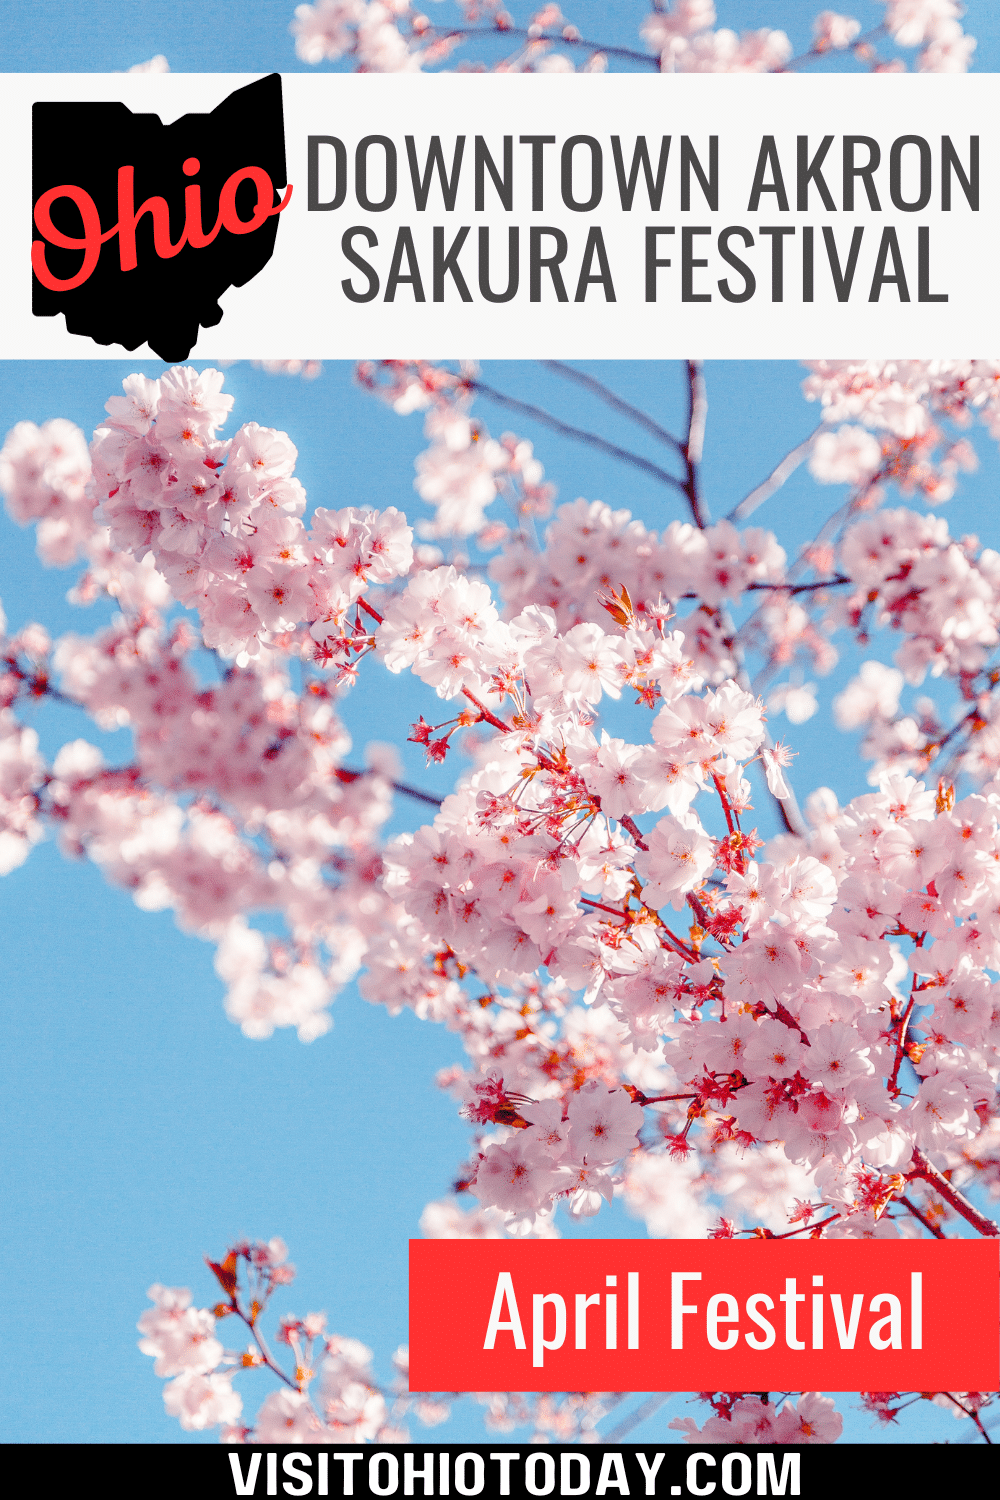 The Downtown Akron Sakura Festival is in early April to celebrate spring and cherry blossom trees.